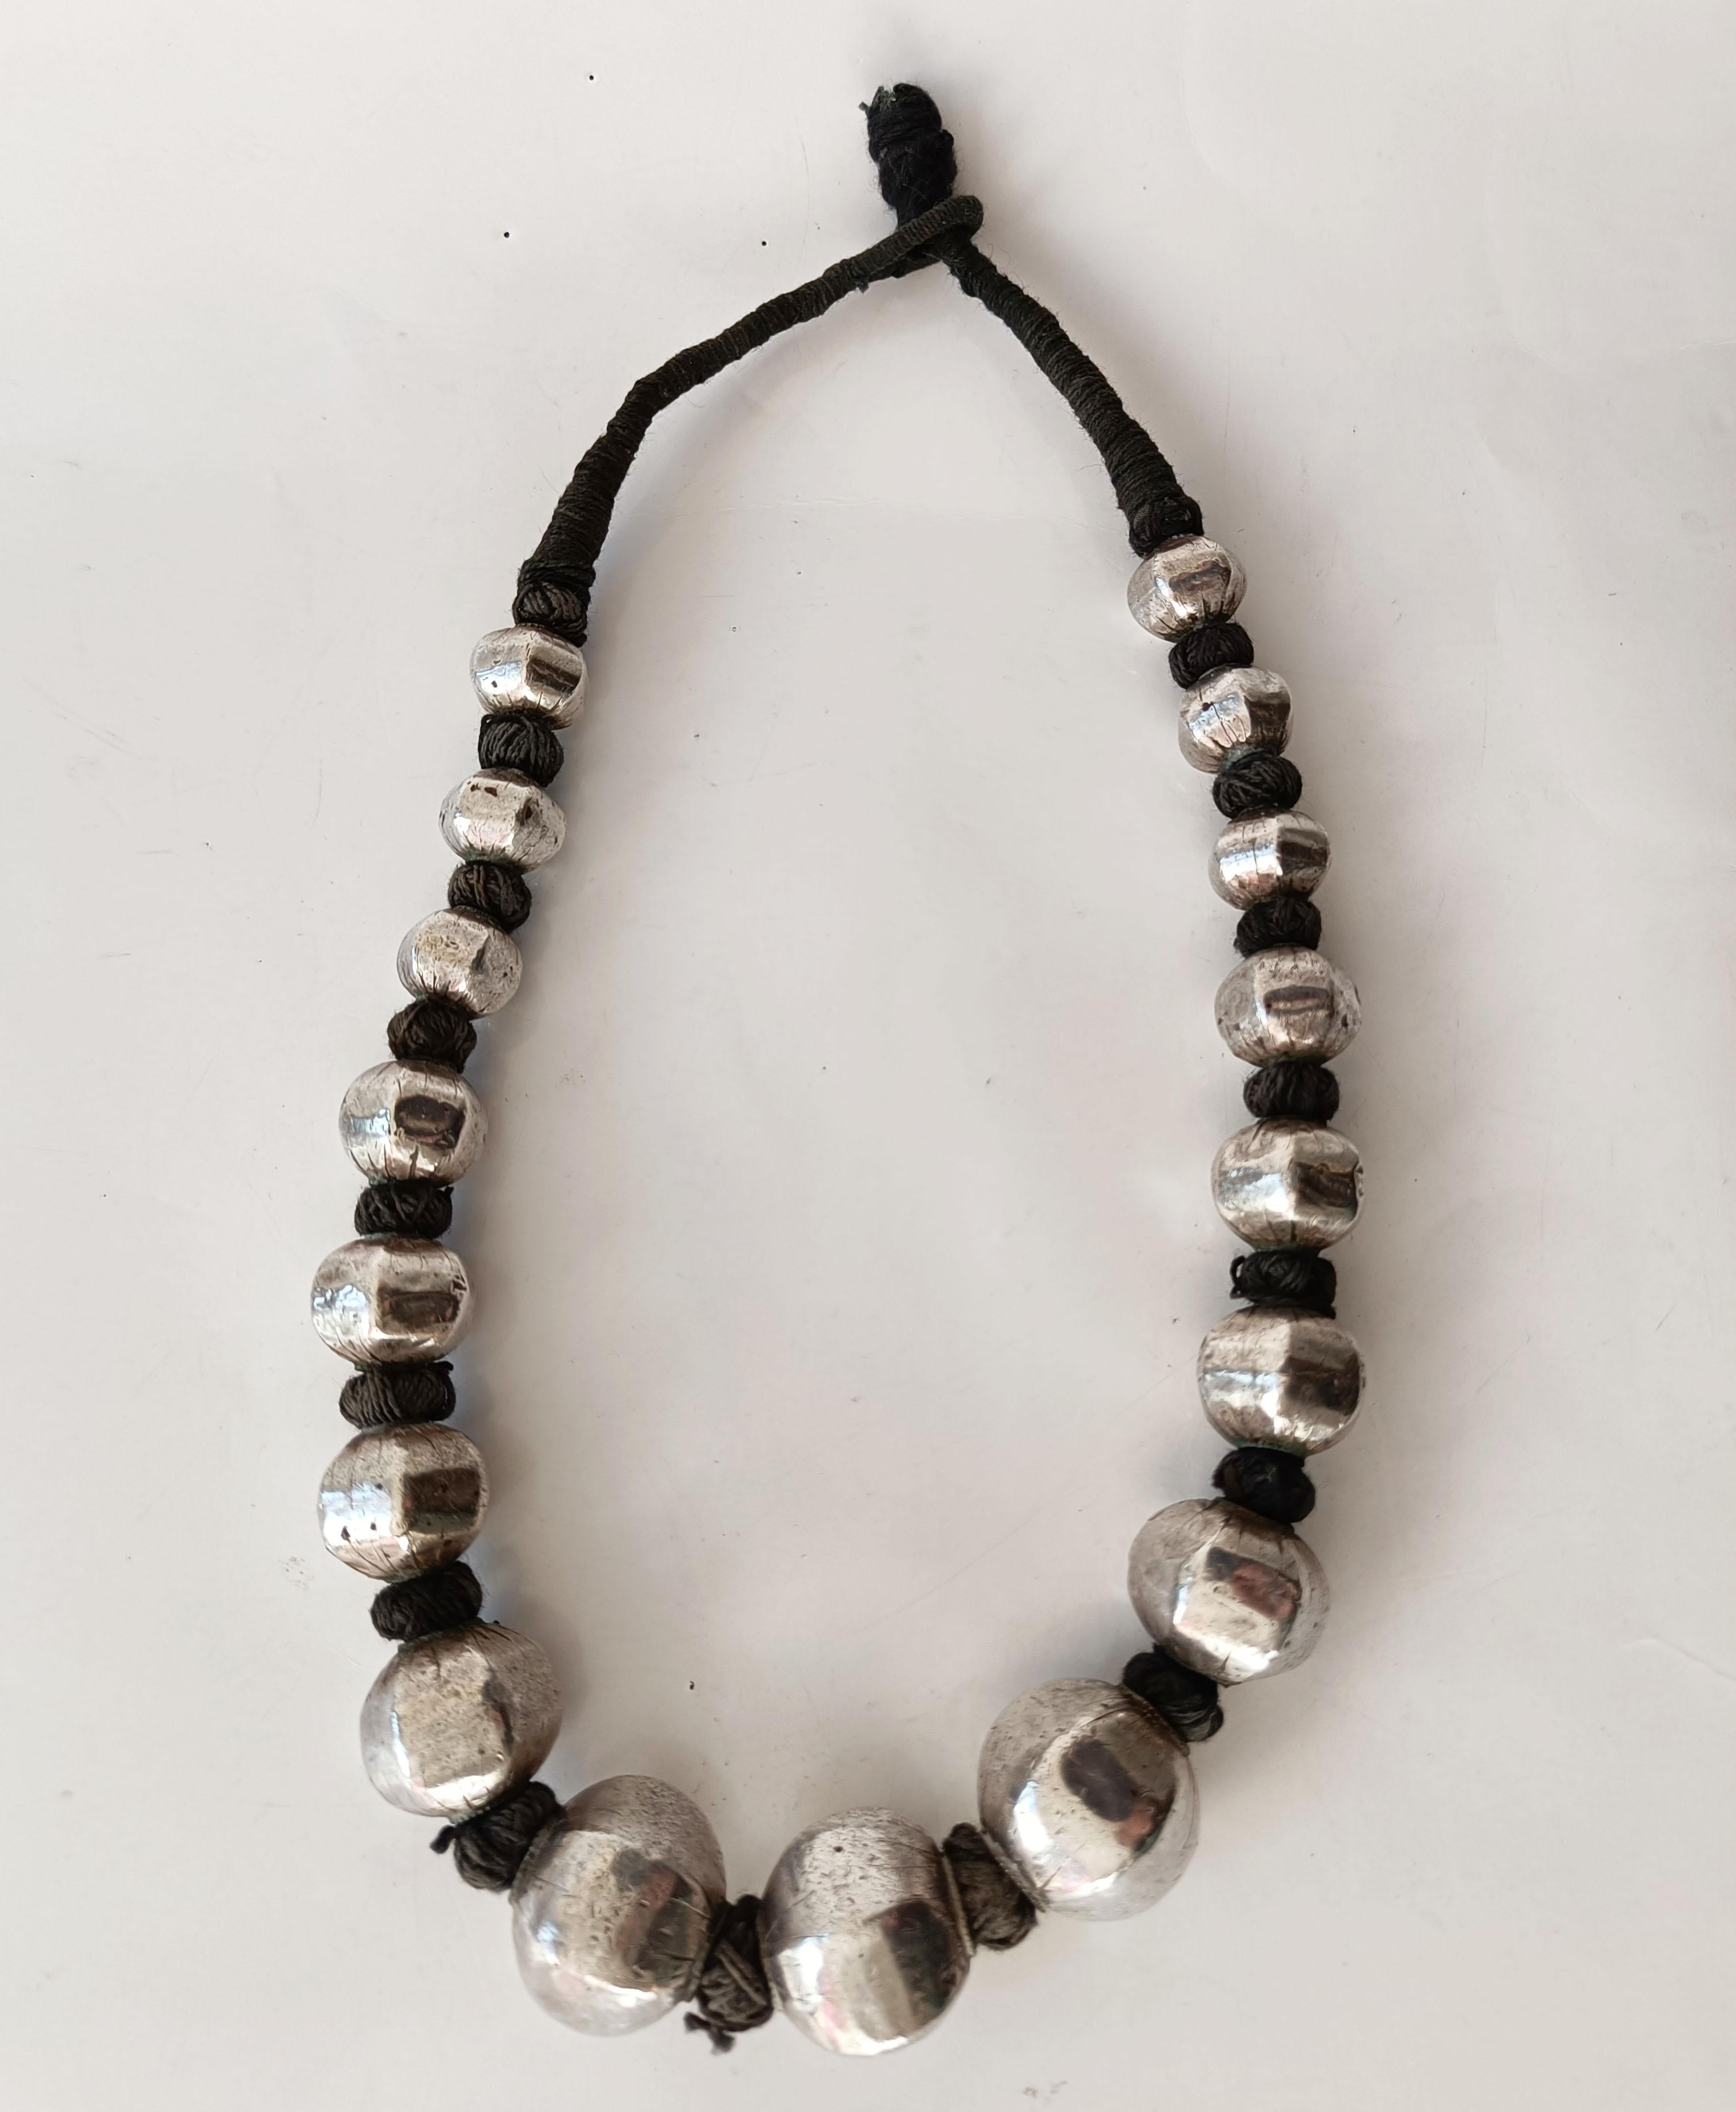 Vintage  Indian large Silver beaded necklace
large silver beads on woven cord 
Darjeeling India early/ mid 20th century
High grade silver. 

Measure: length 58 cm 23.5 inches,  

Period early 20th century.

Condition: Fine.